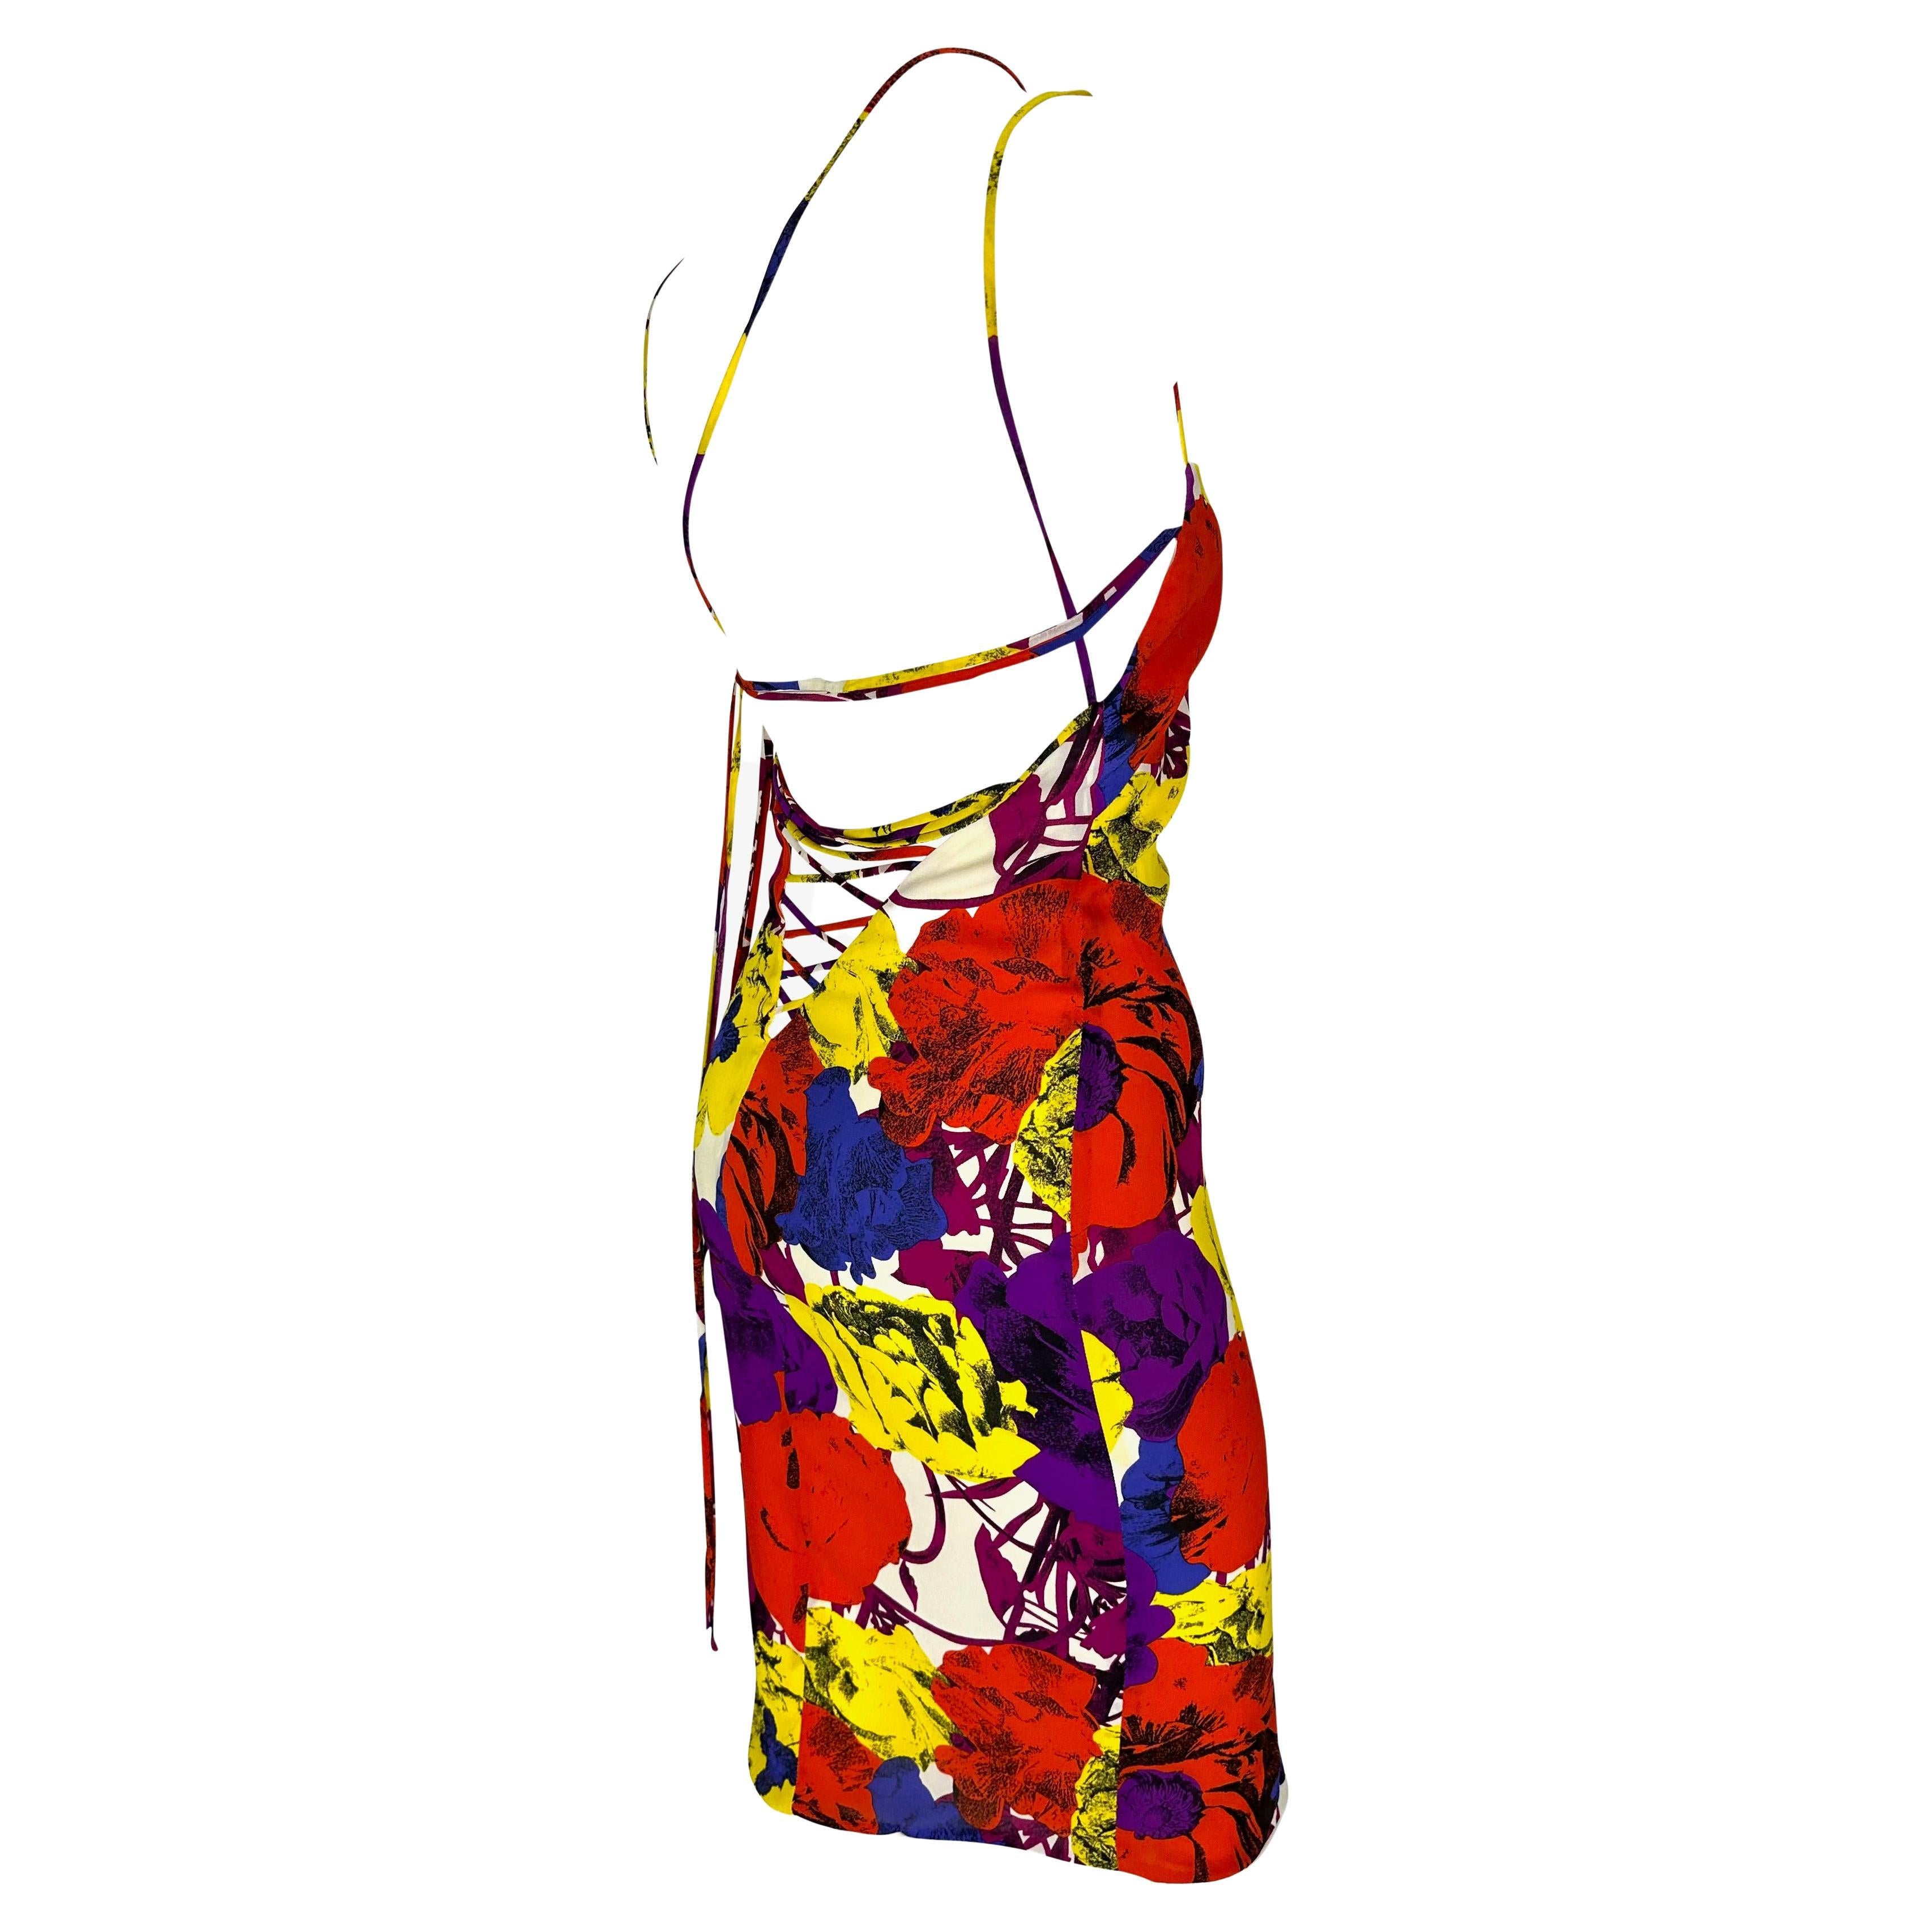 S/S 2002 Gianni Versace by Donatella Pop Art Floral Print Lace-Up Backless Dress For Sale 4